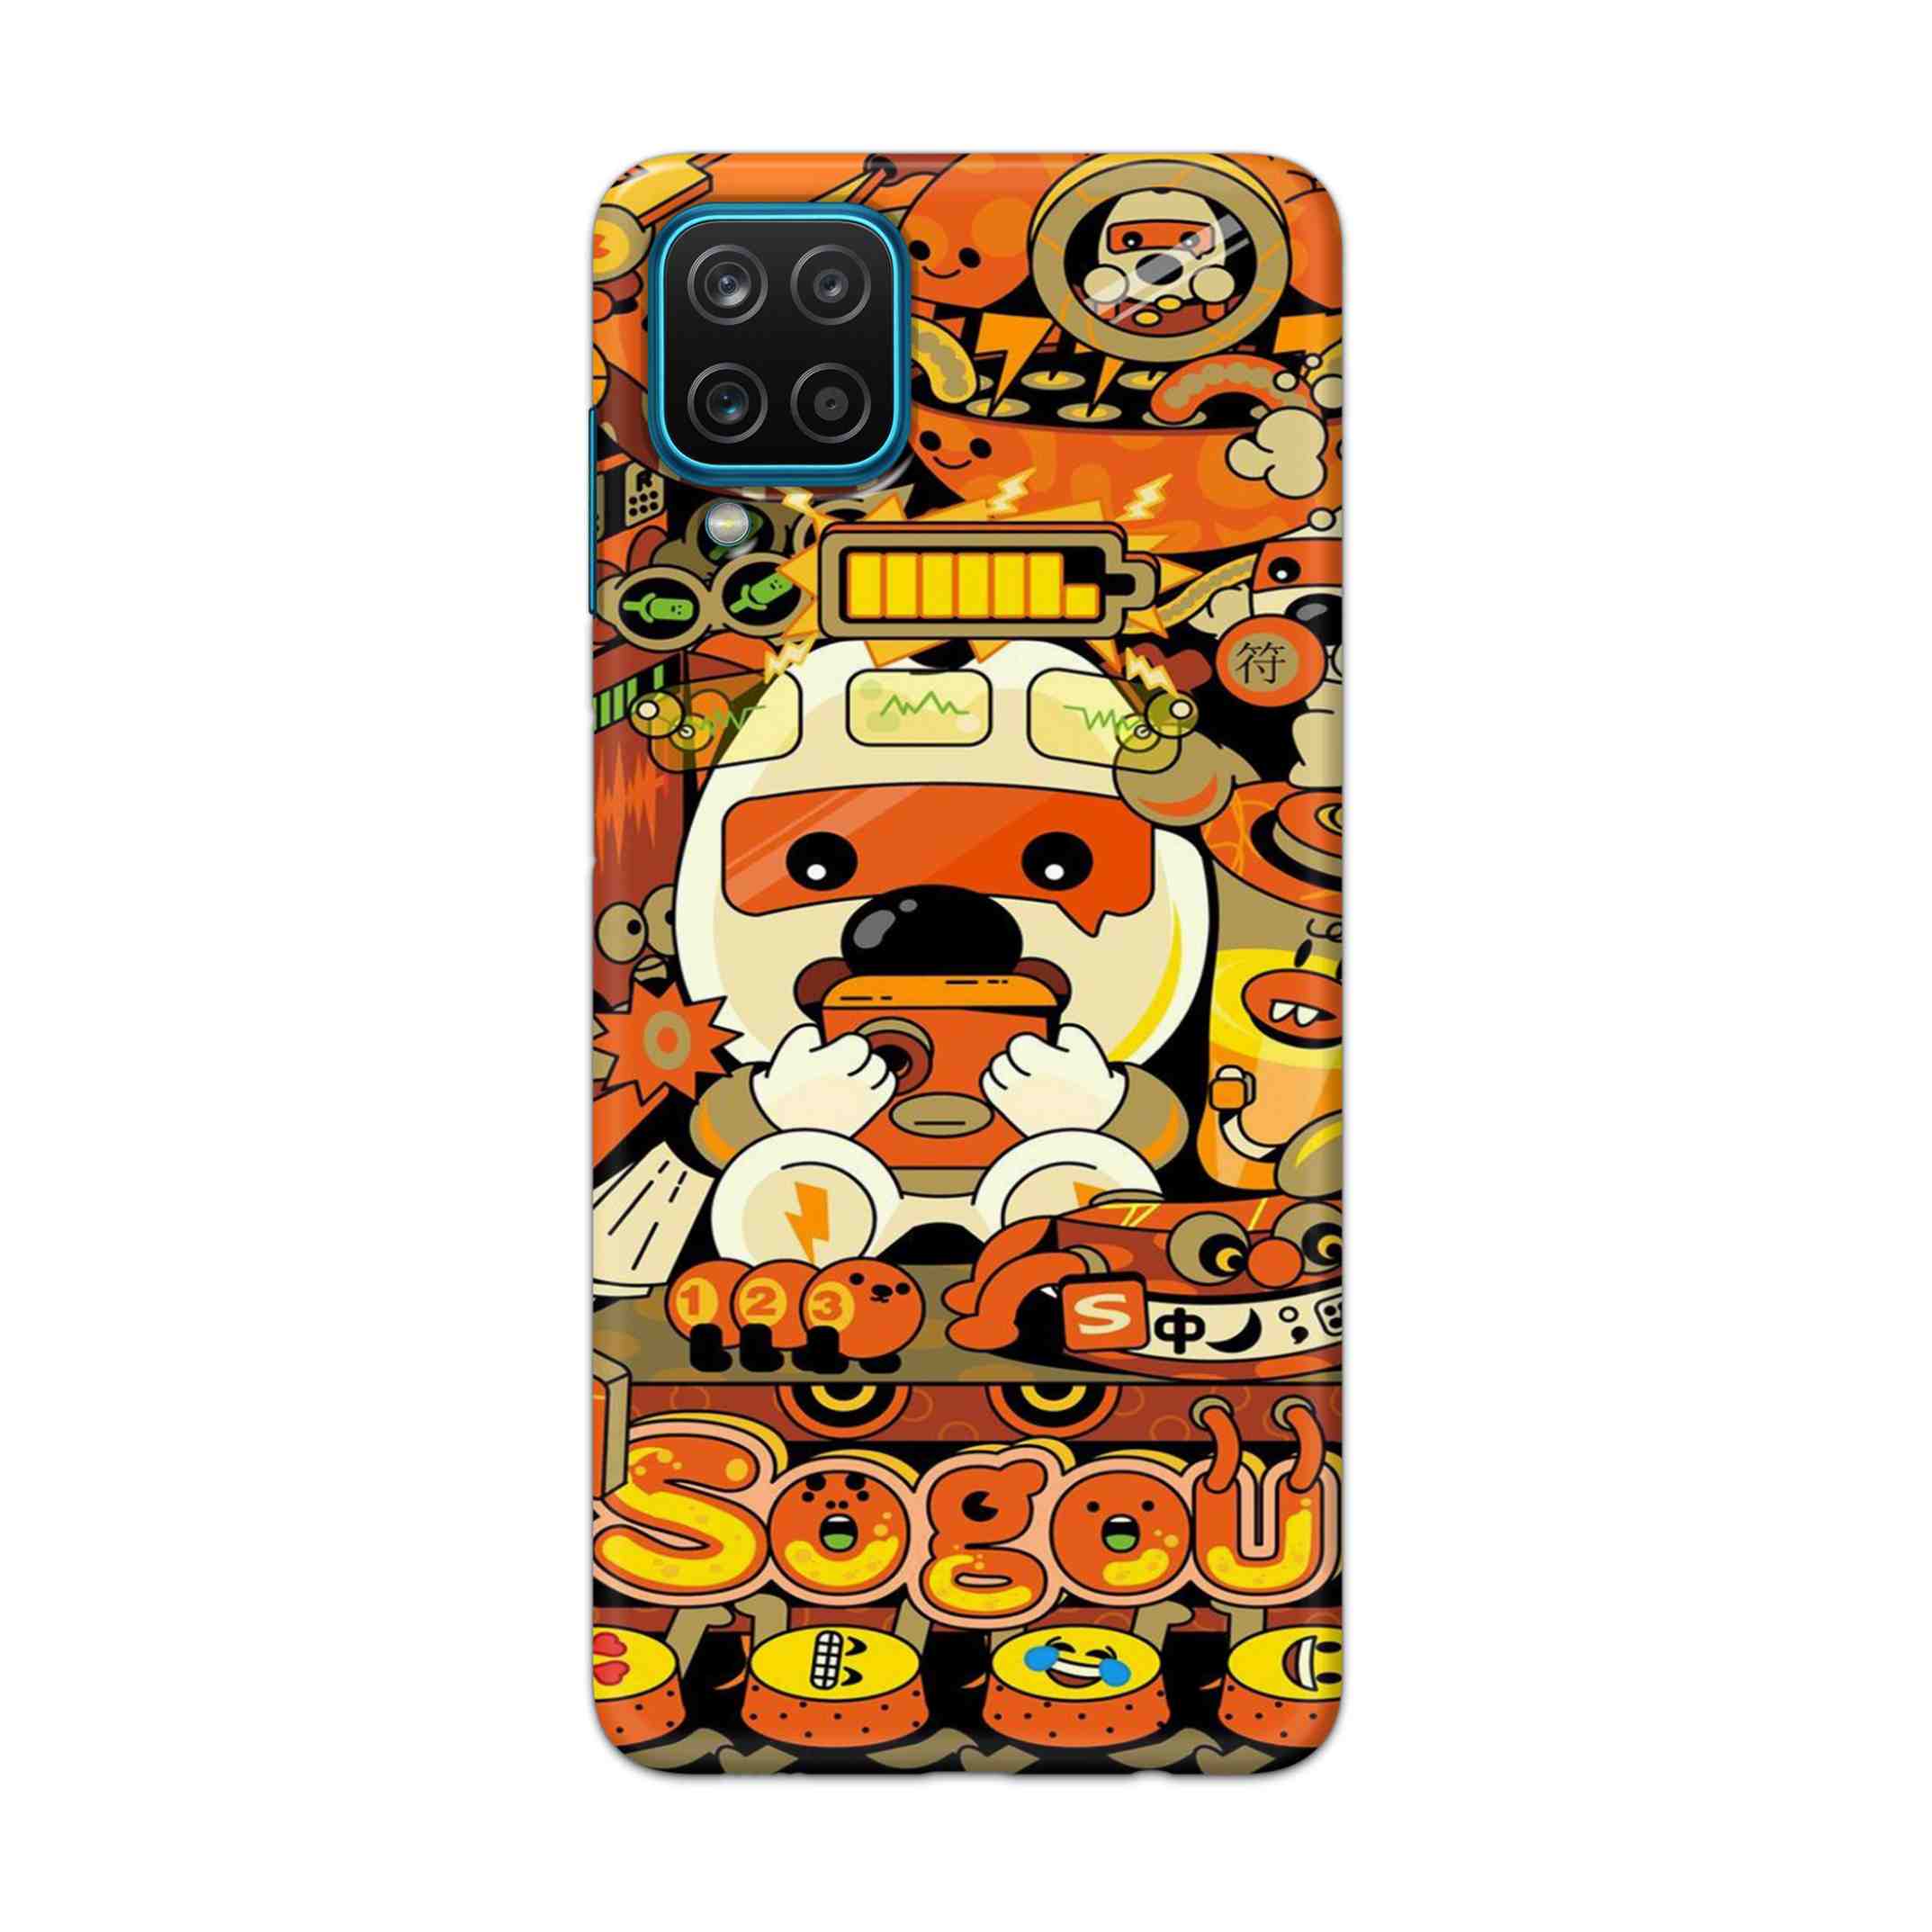 Buy Sogou Hard Back Mobile Phone Case Cover For Samsung Galaxy A12 Online